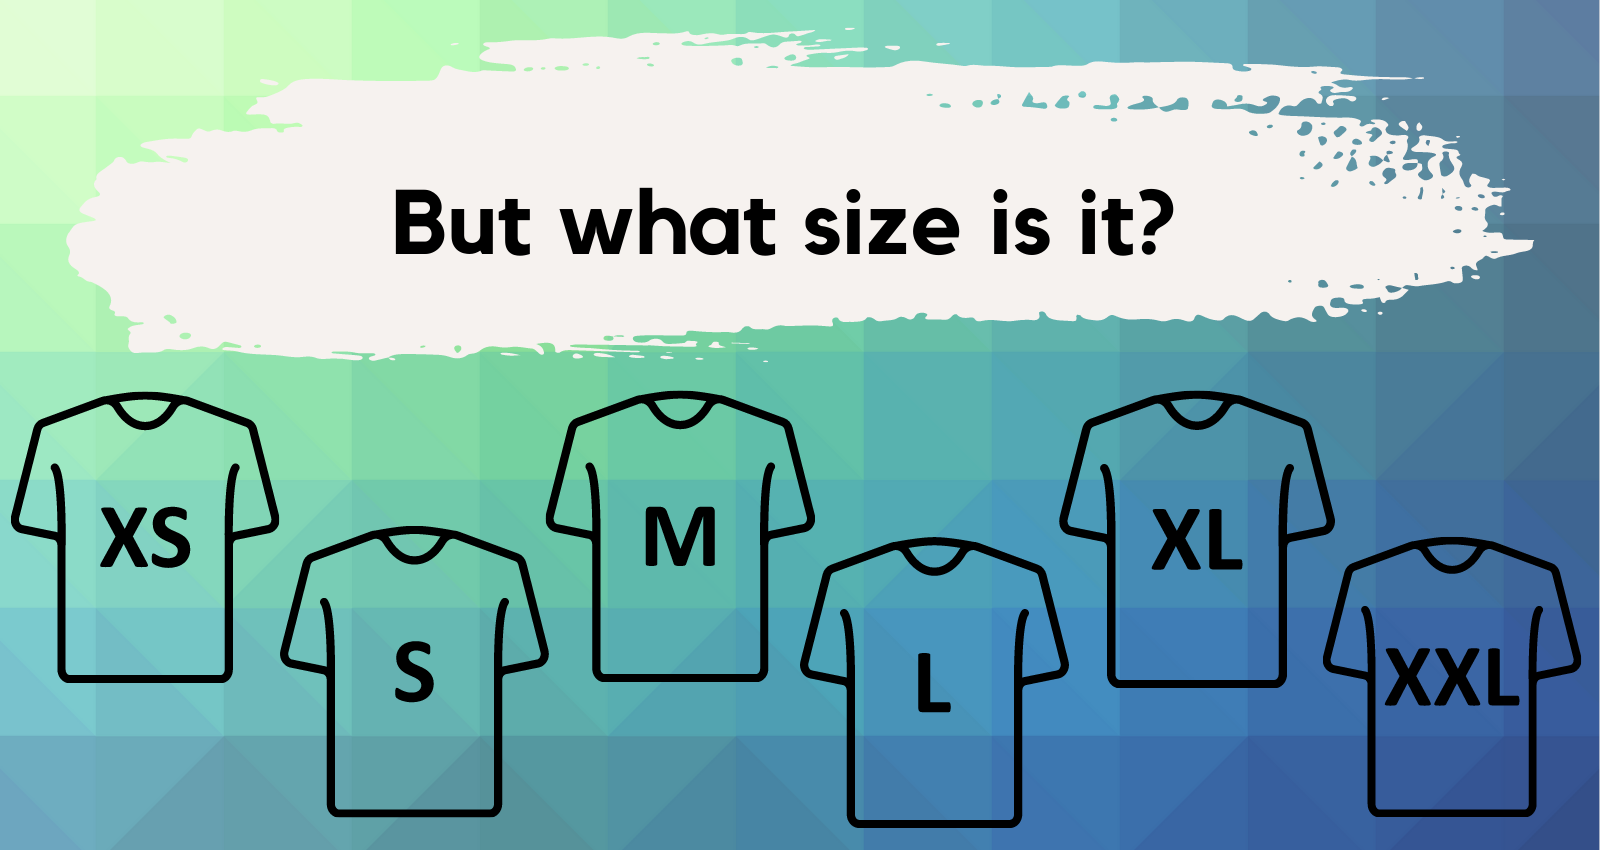 Drawings of t-shirts with sizes written on them from XS to XXL, with the heading, “But what size is it?”